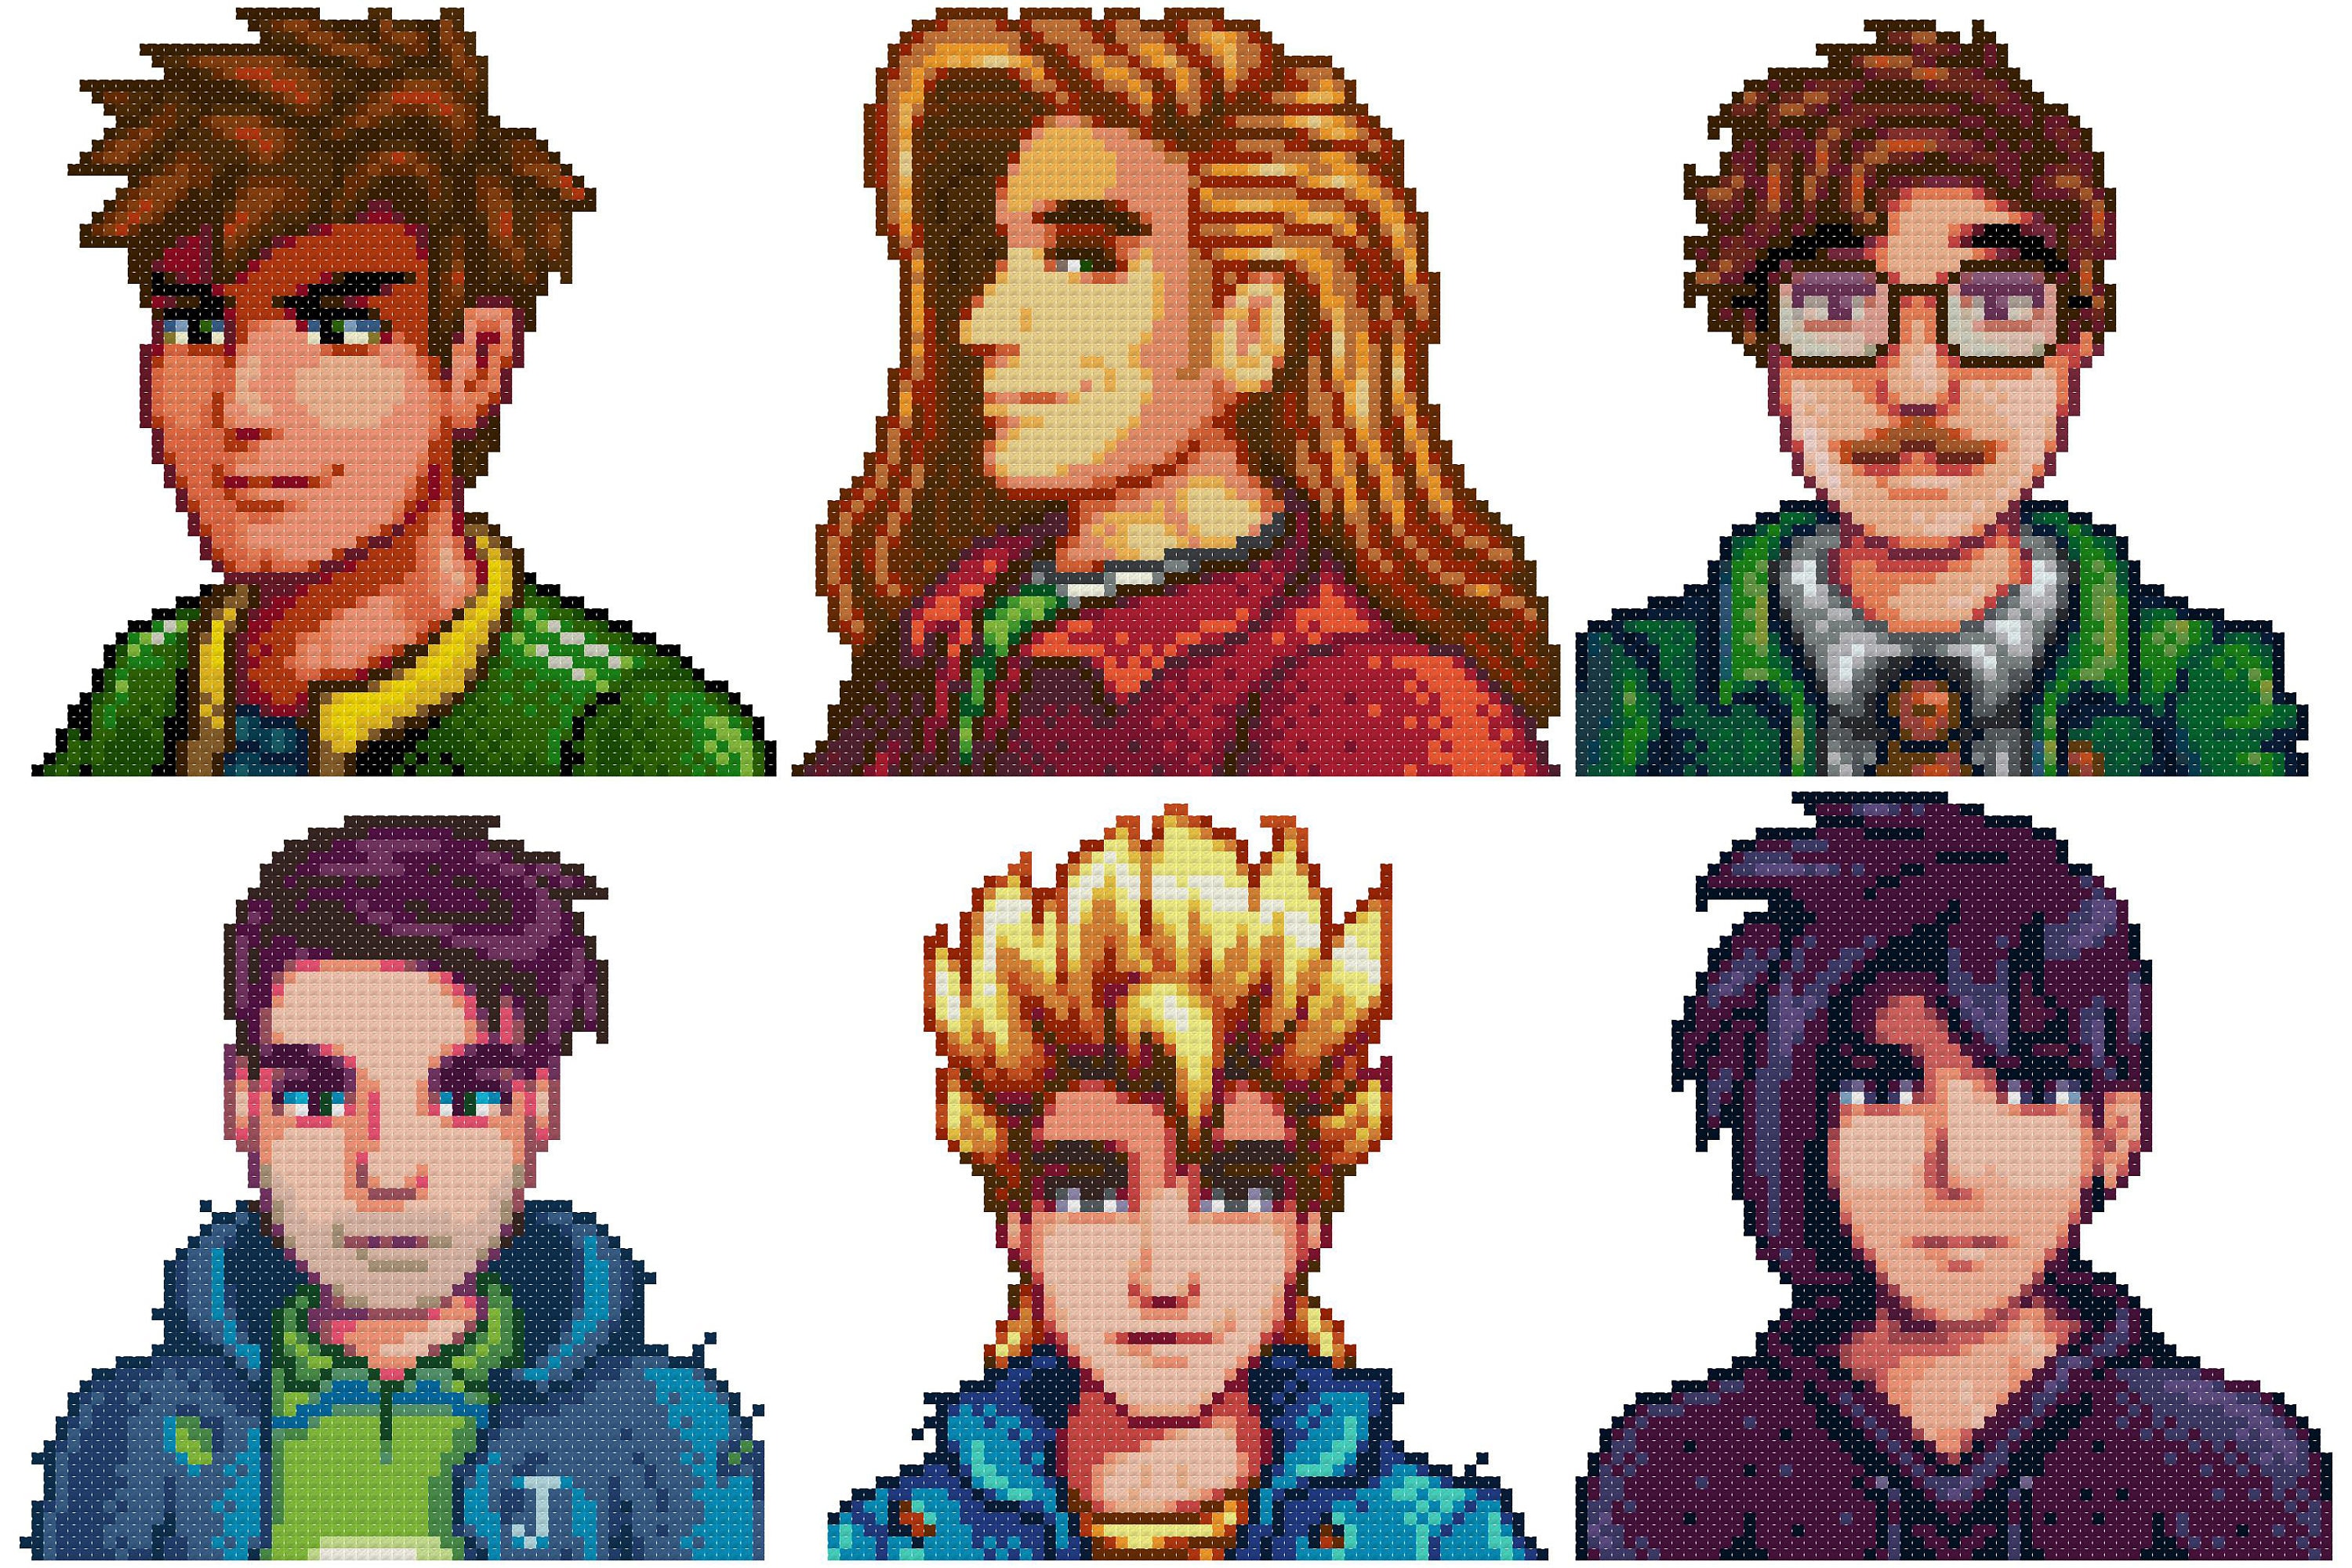 Stardew valley bachelors and bachelorettes.